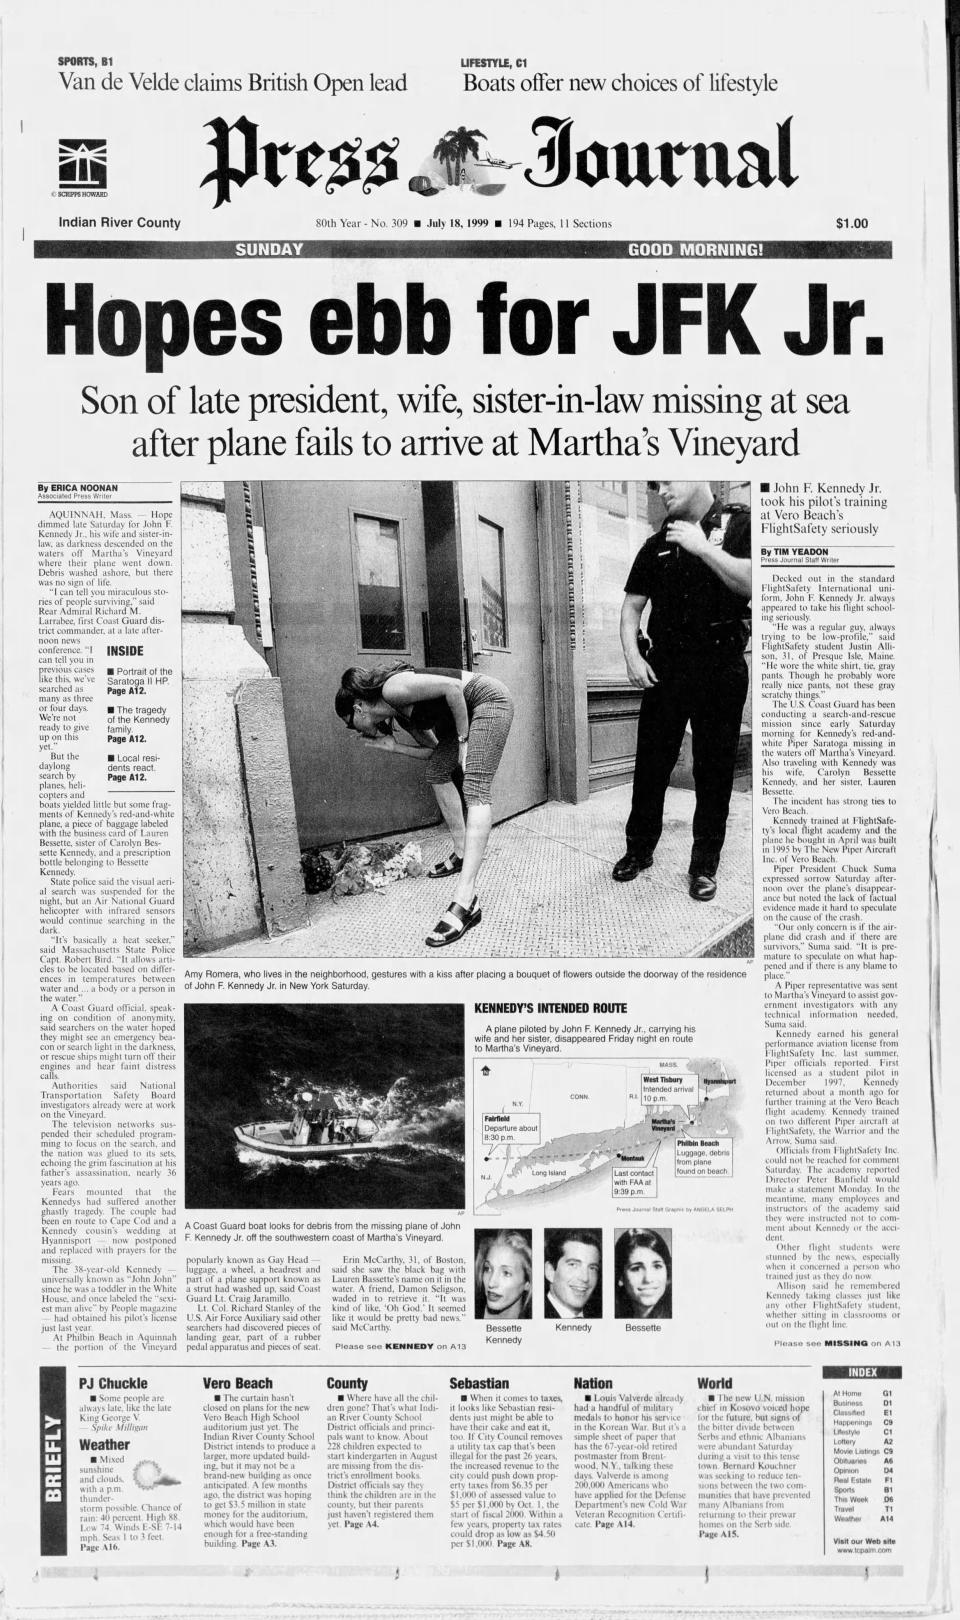 A Press Journal front page from July 18, 1999, two days after John F. Kennedy Jr's plane crashed into the Atlantic Ocean.